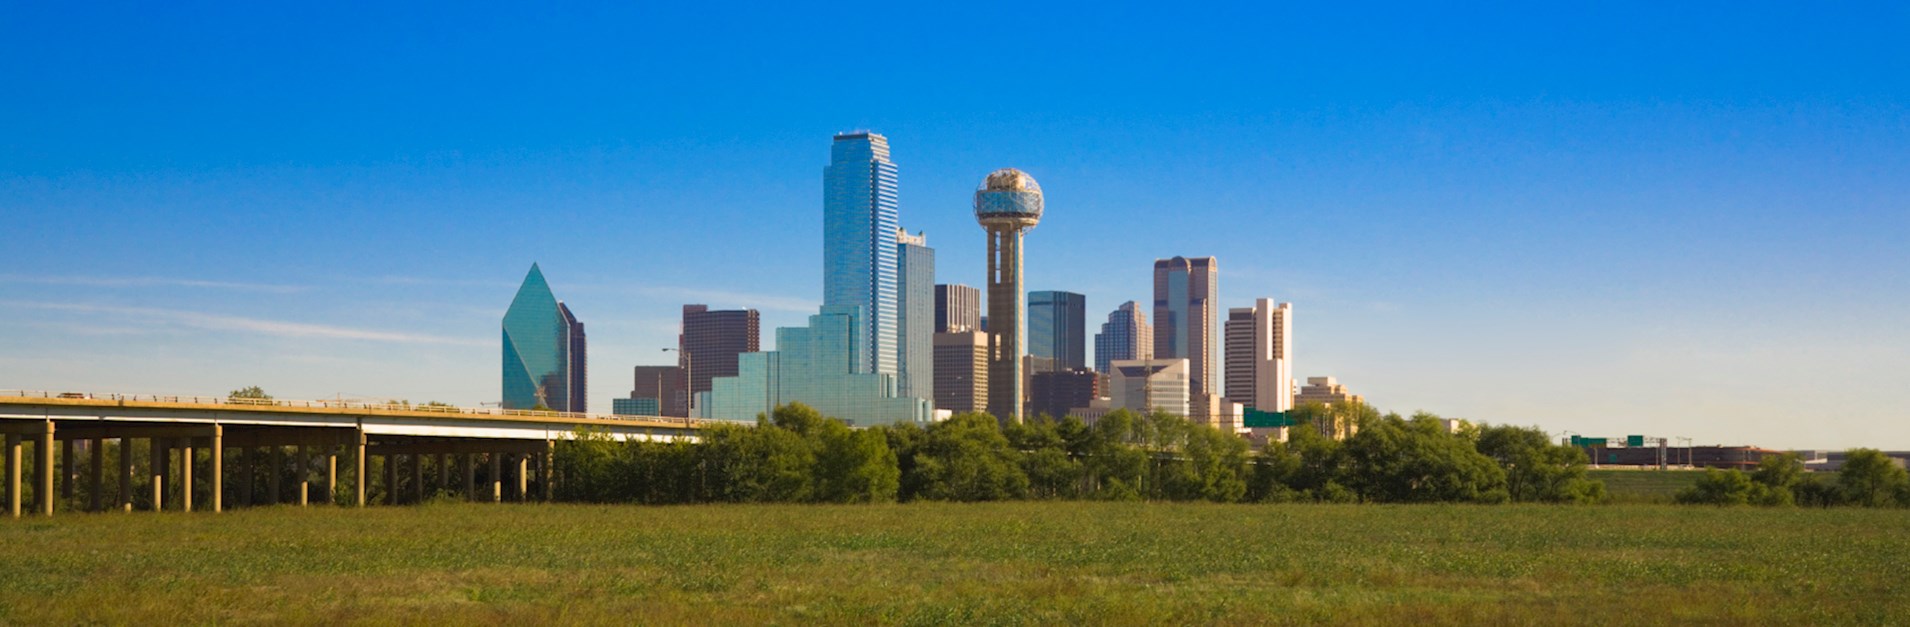 Is Fort Worth more affordable than Dallas?